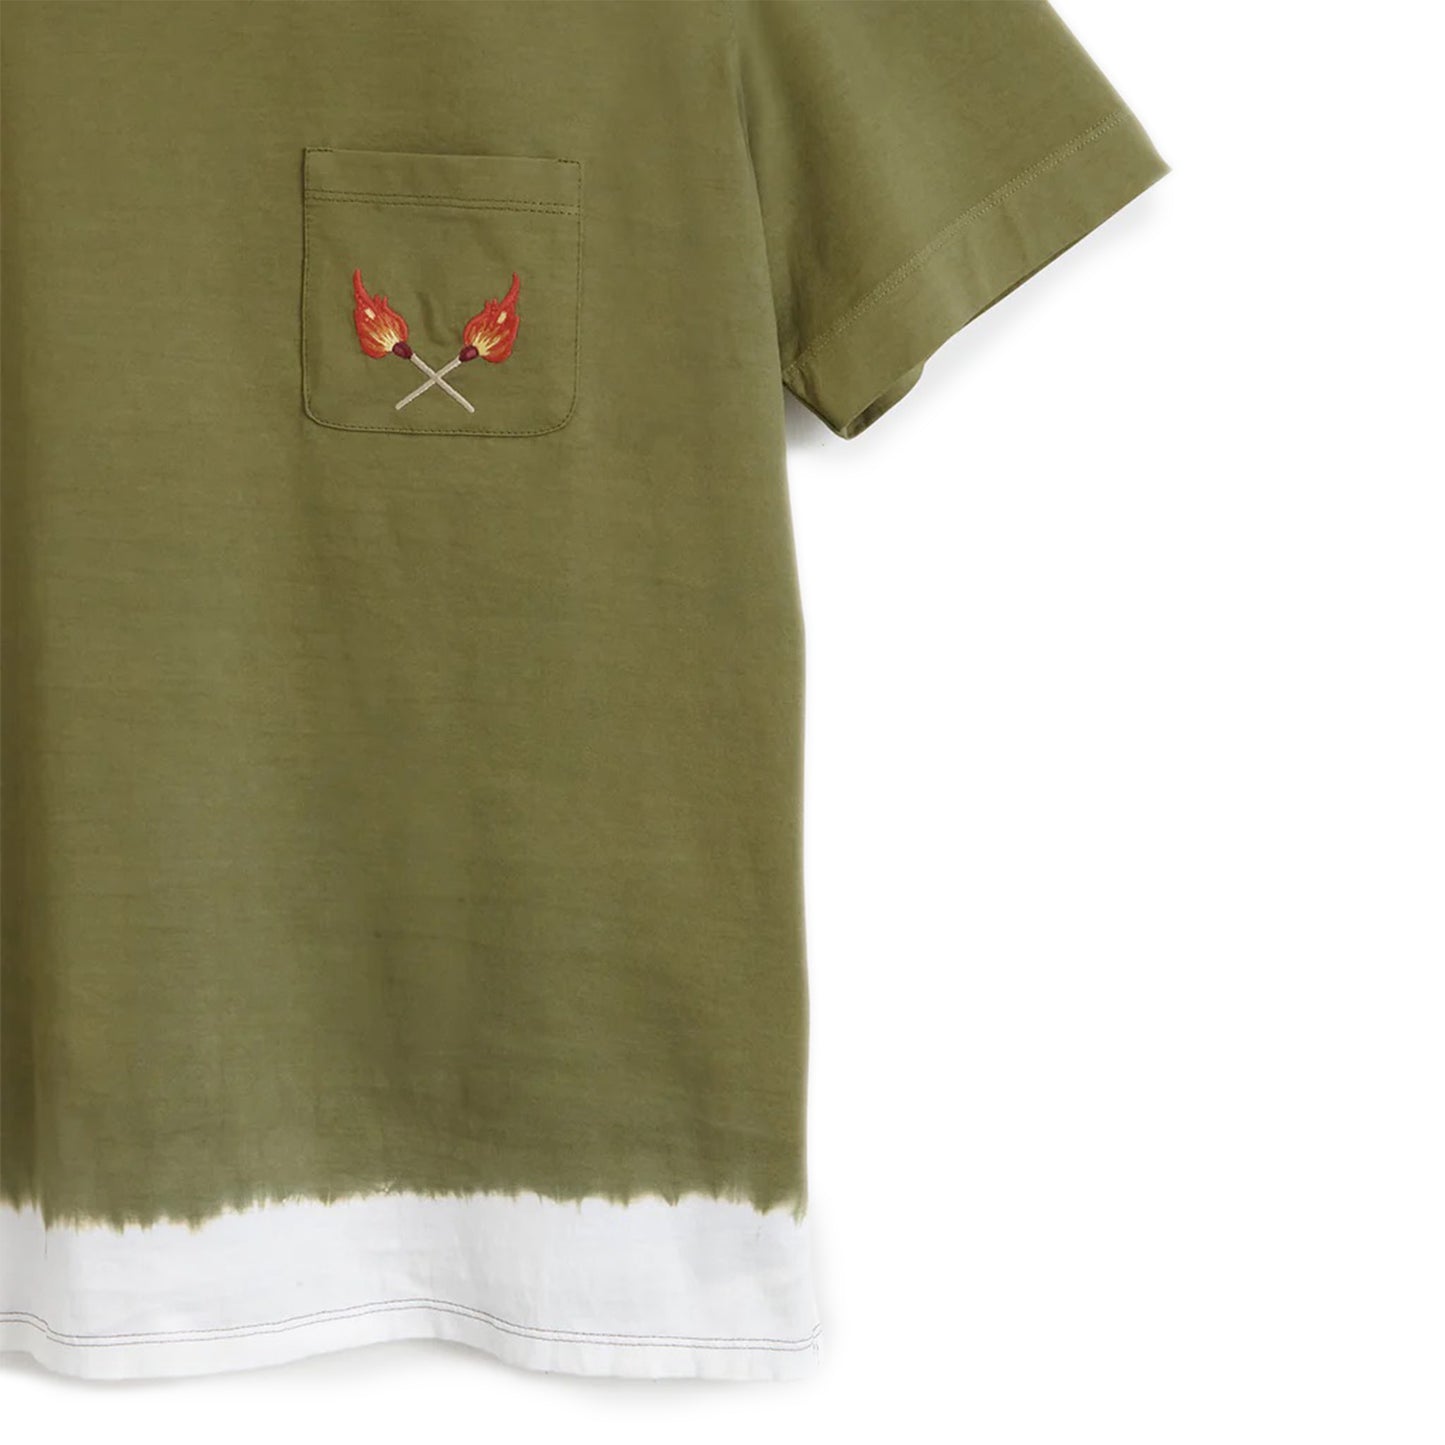 VICTOR T-SHIRT Medium Green crewneck t-shirt Hand dyed cotton jersey Chest pocket with embroidered artwork Composition: 100% cotton Dry clean Country of origin: Italy